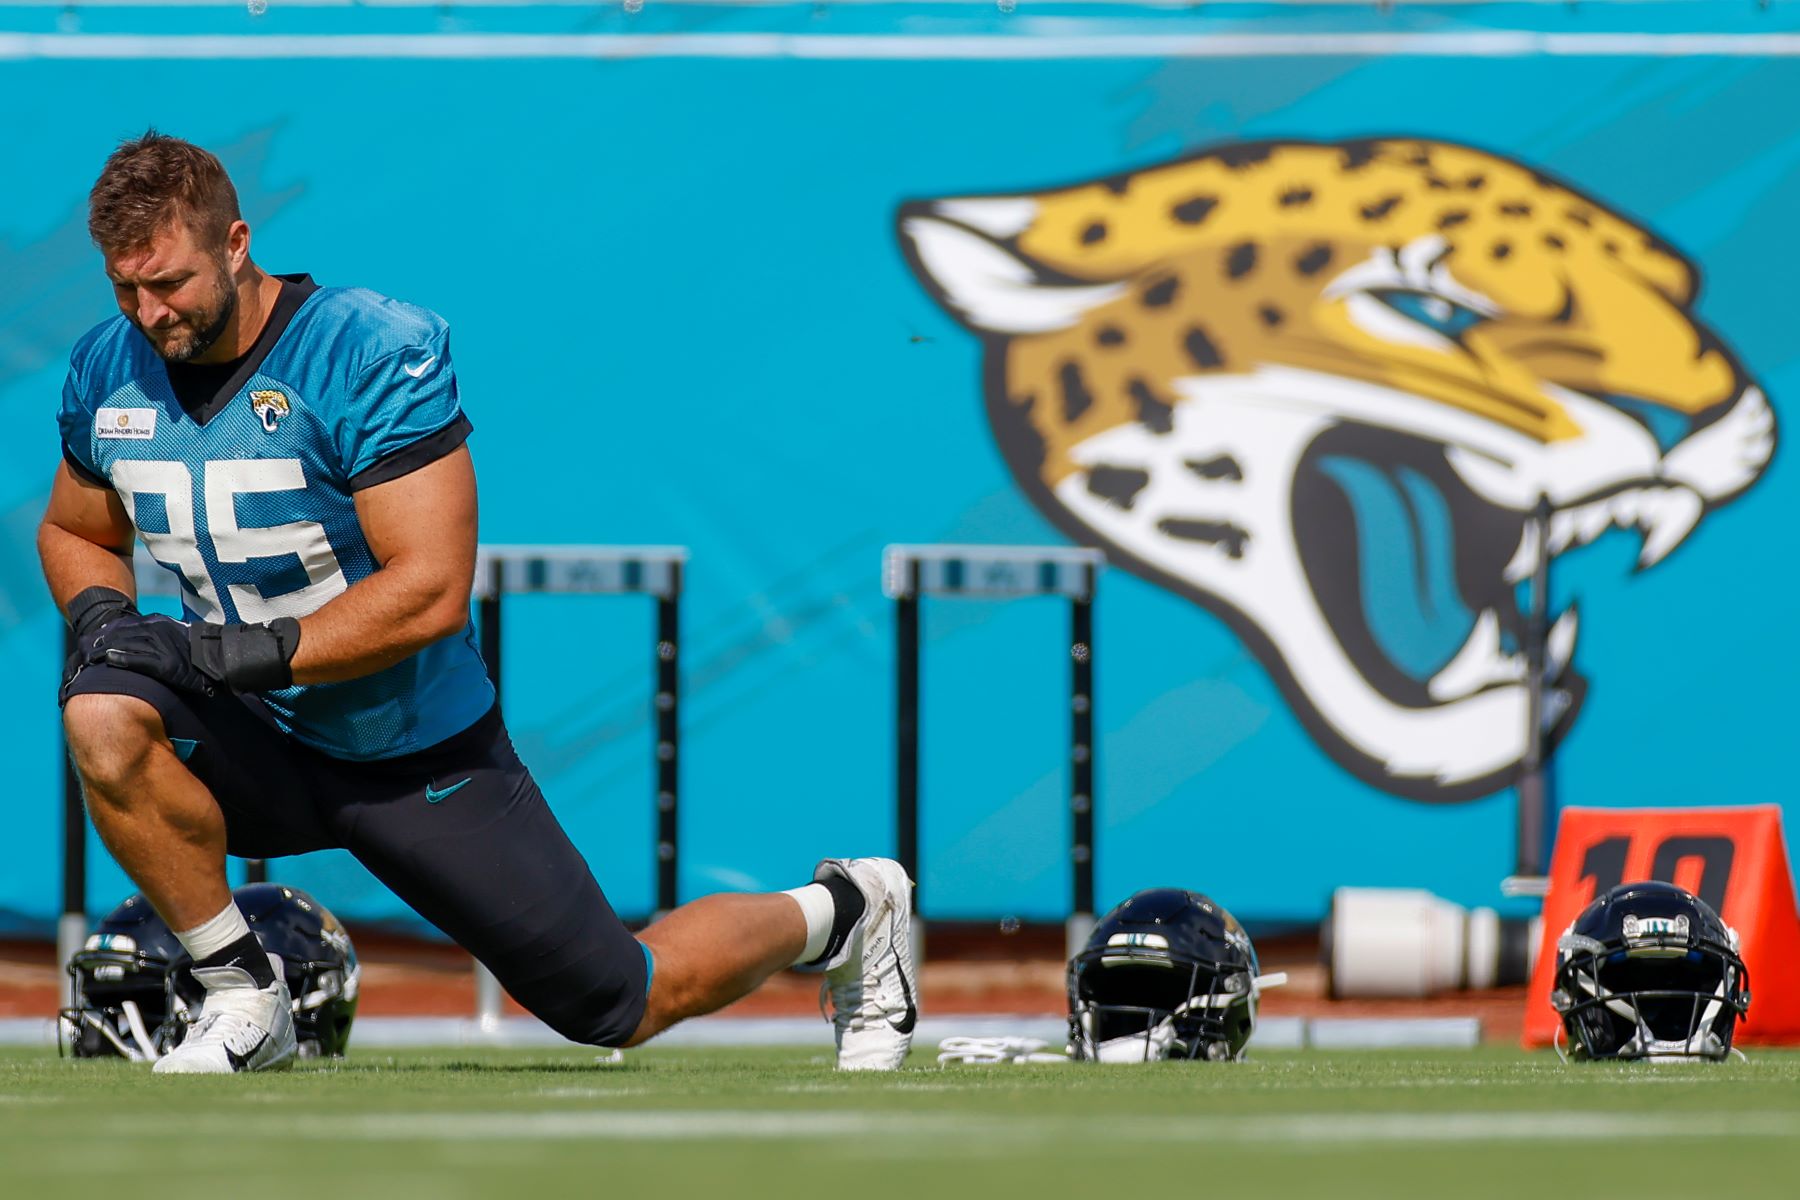 Jacksonville Jaguars Tight End Tim Tebow stretching before a scrimmage match in Jacksonville, Florida